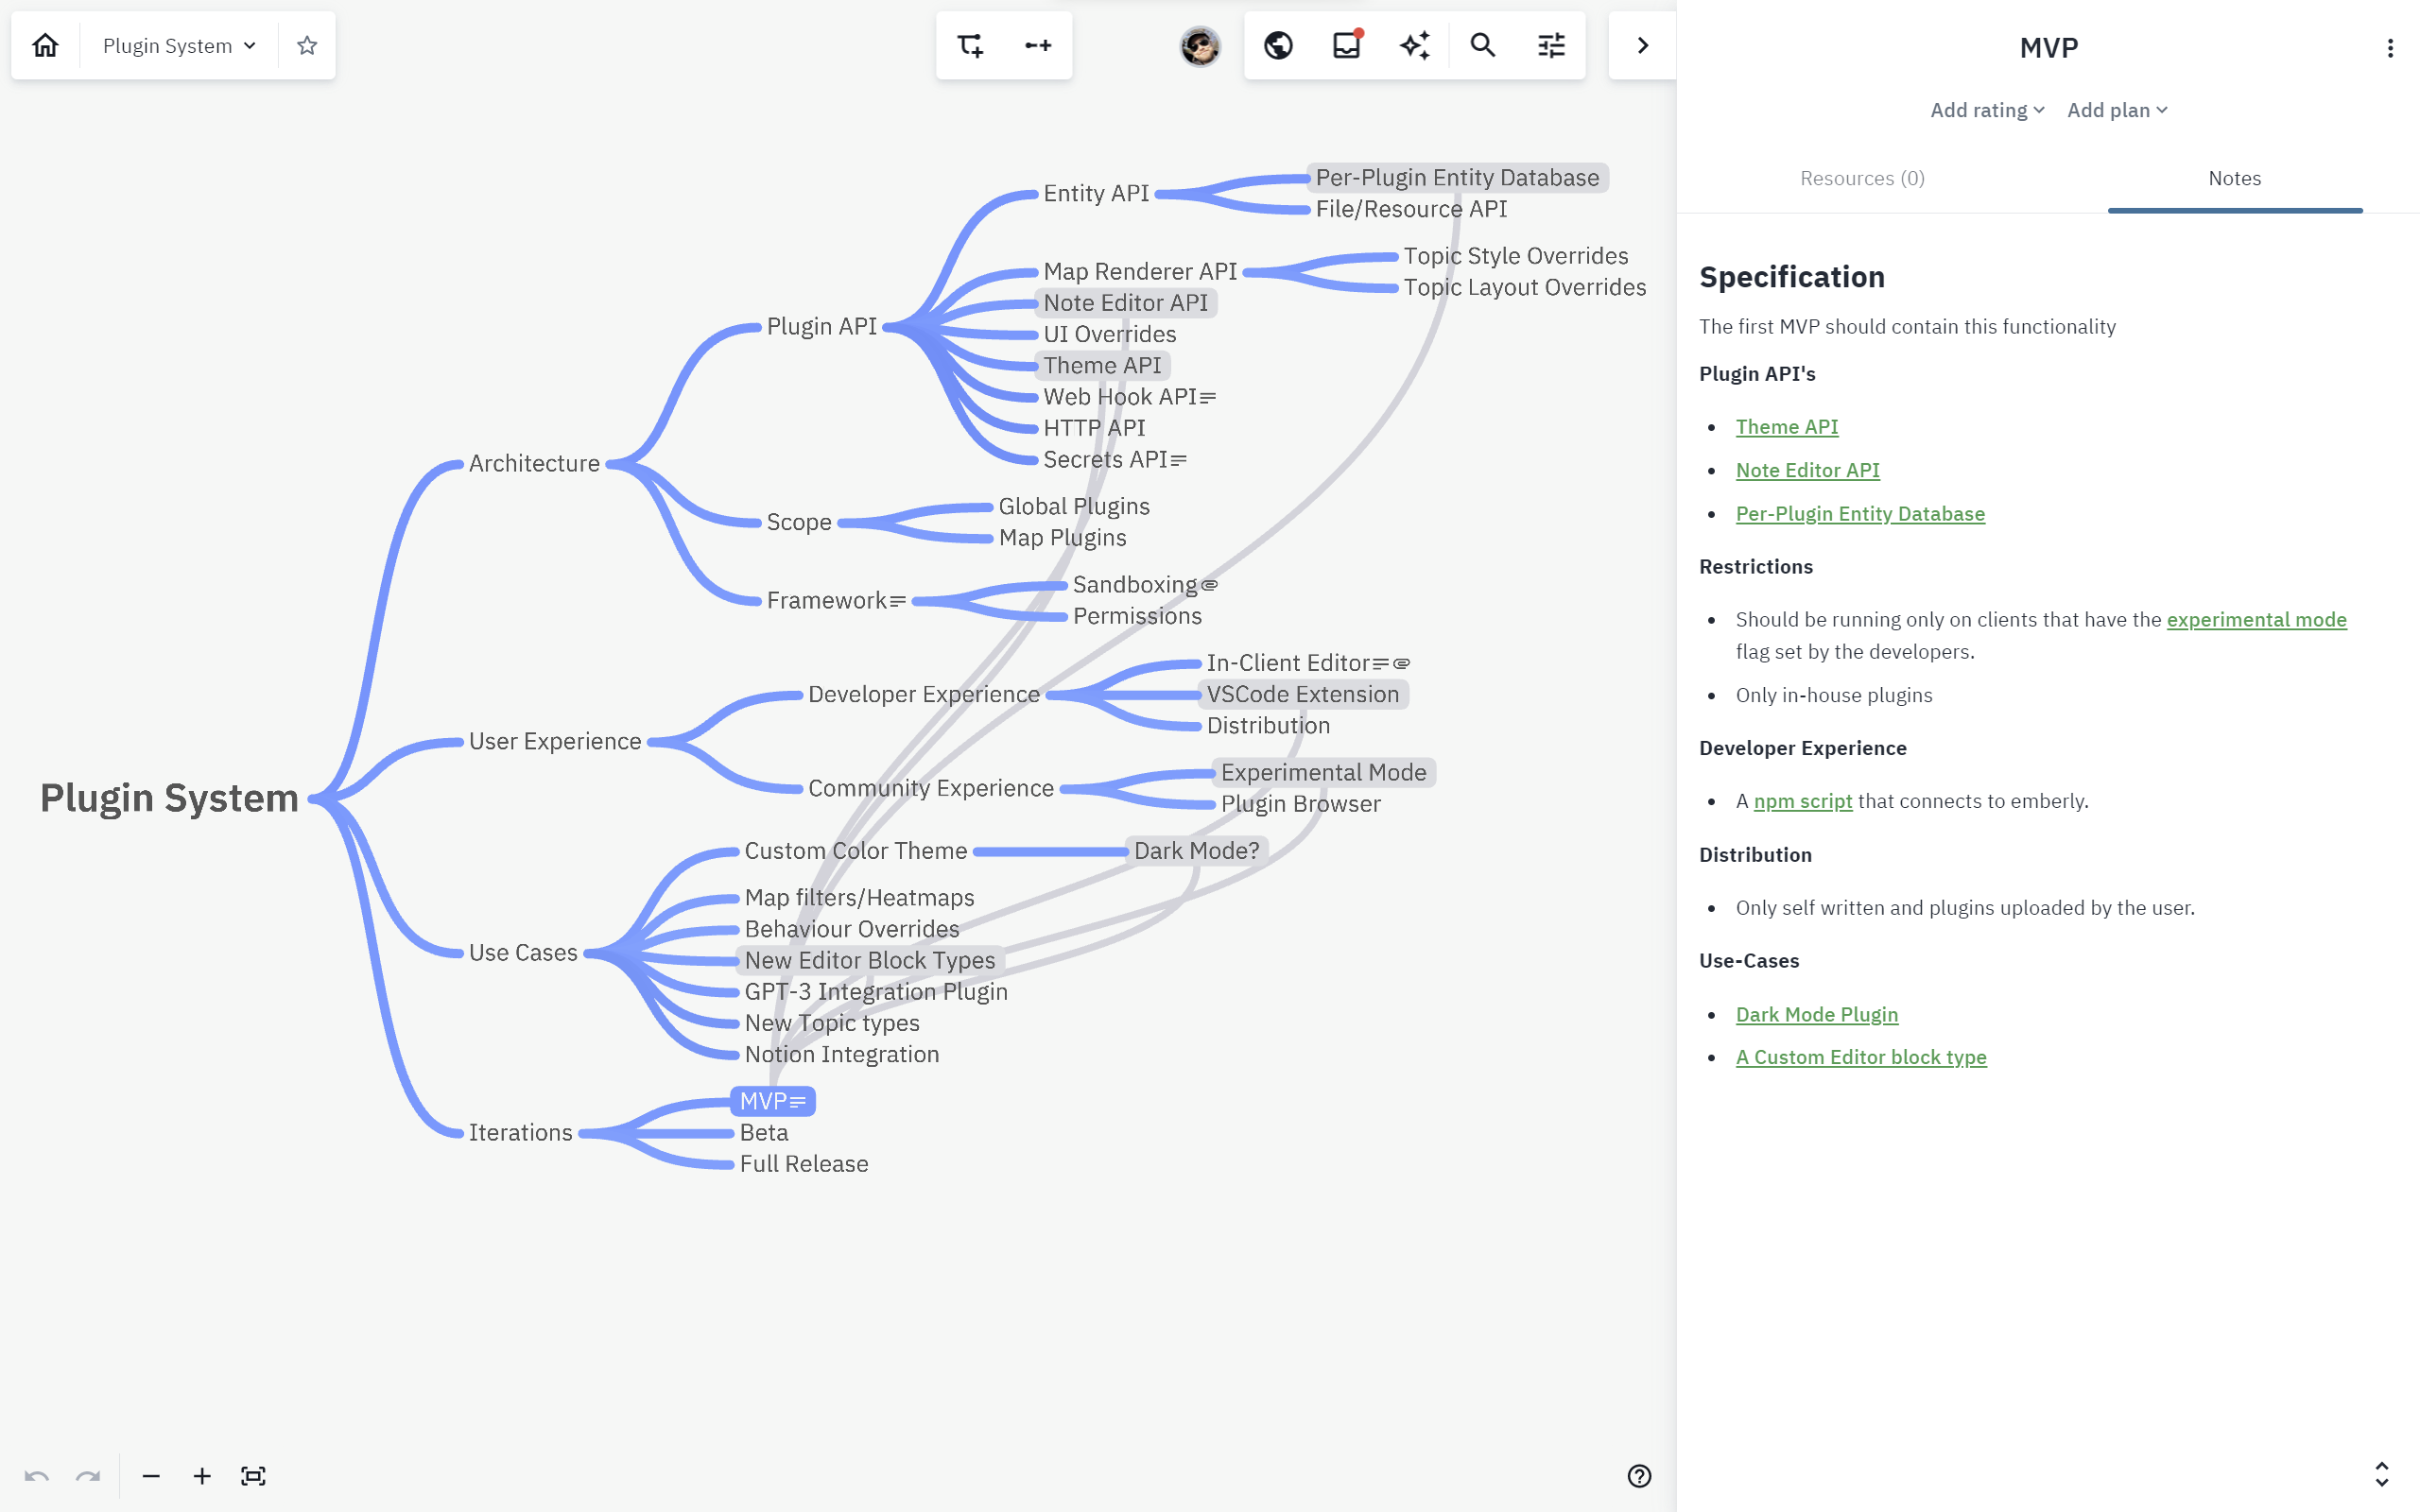 How to plan a software project using a mind-map